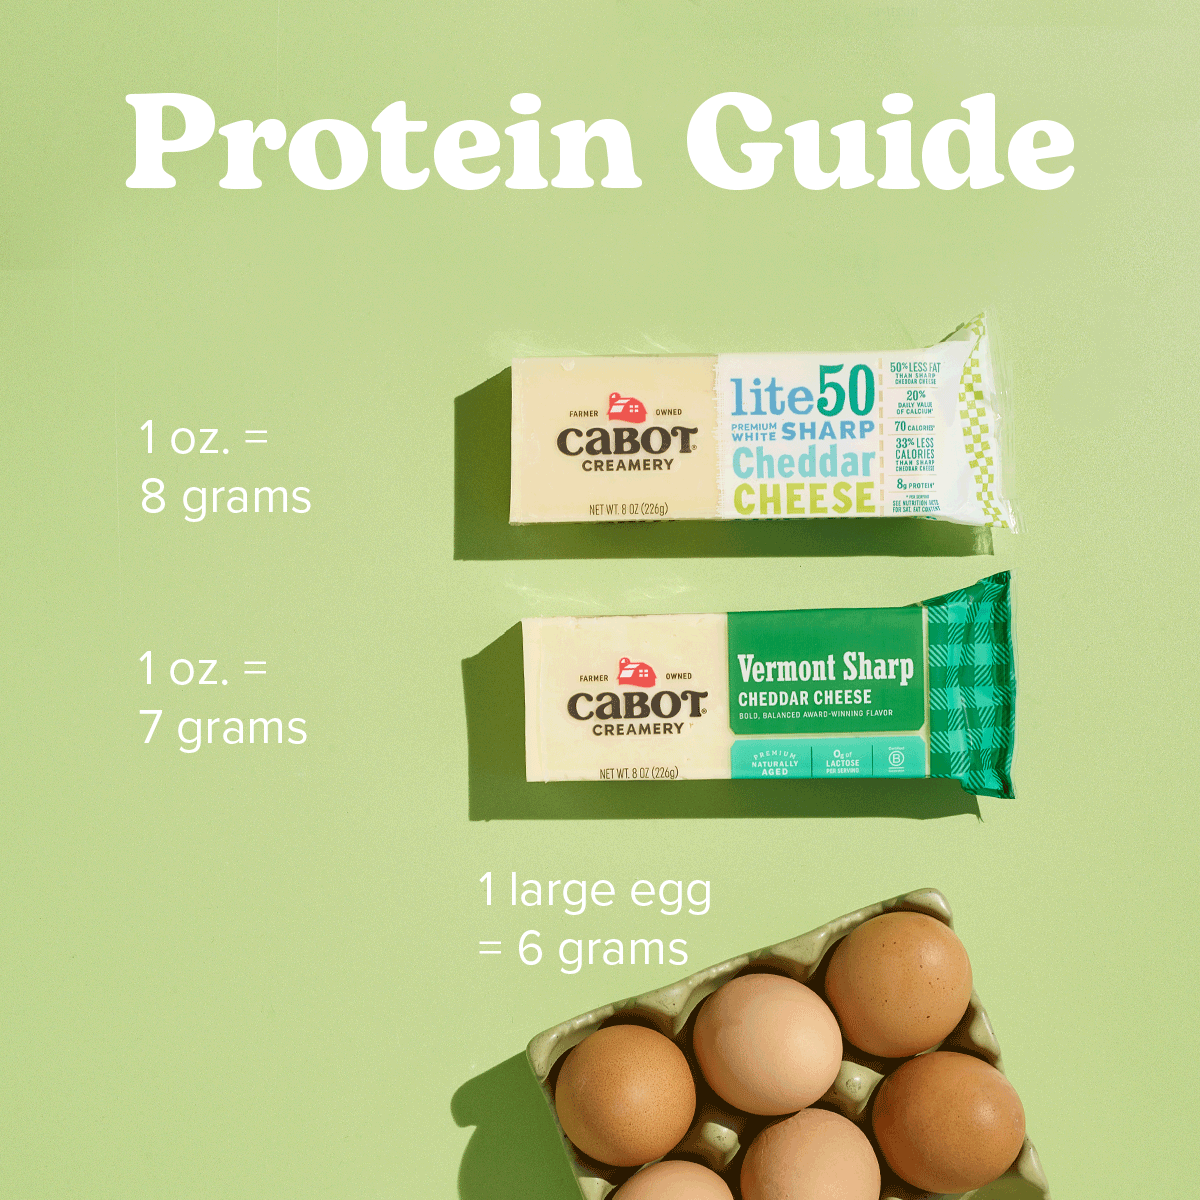 Protein Guide